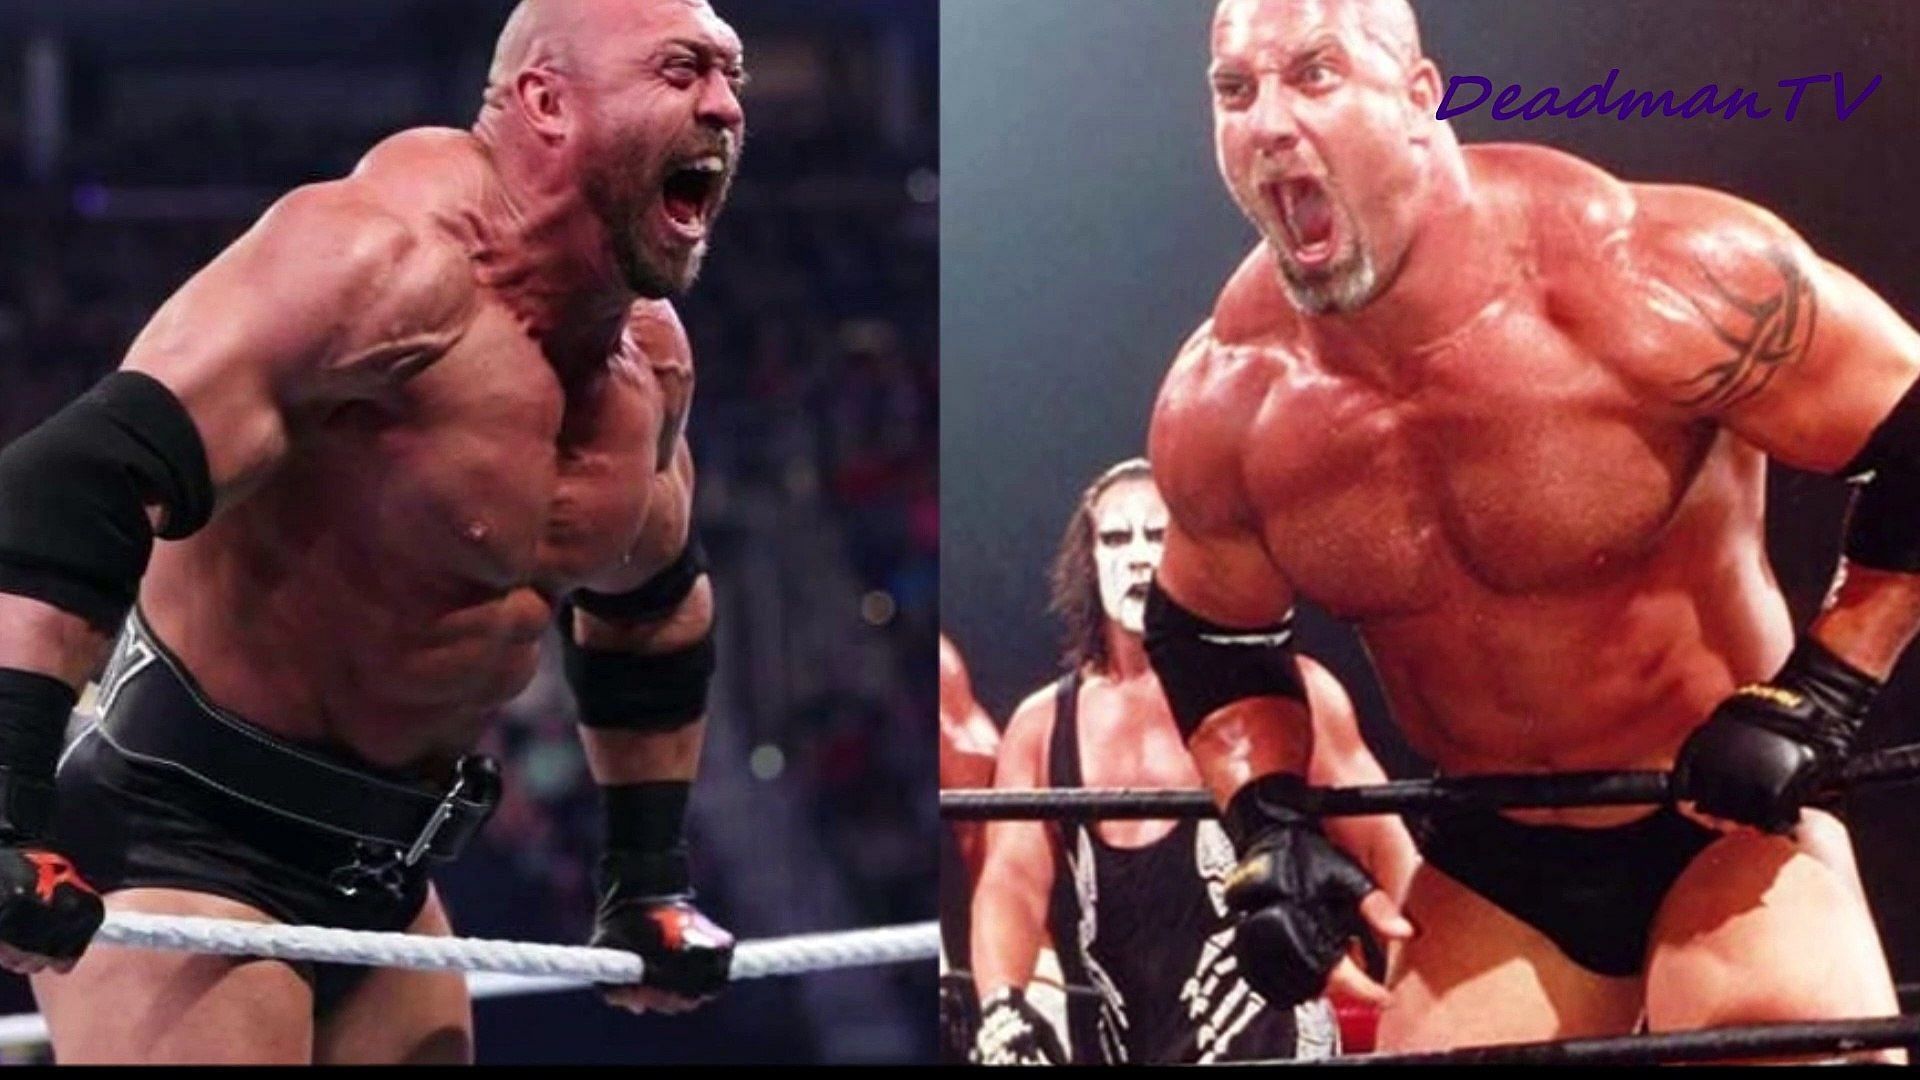 Ryback wants a big match with the former WCW Champion.